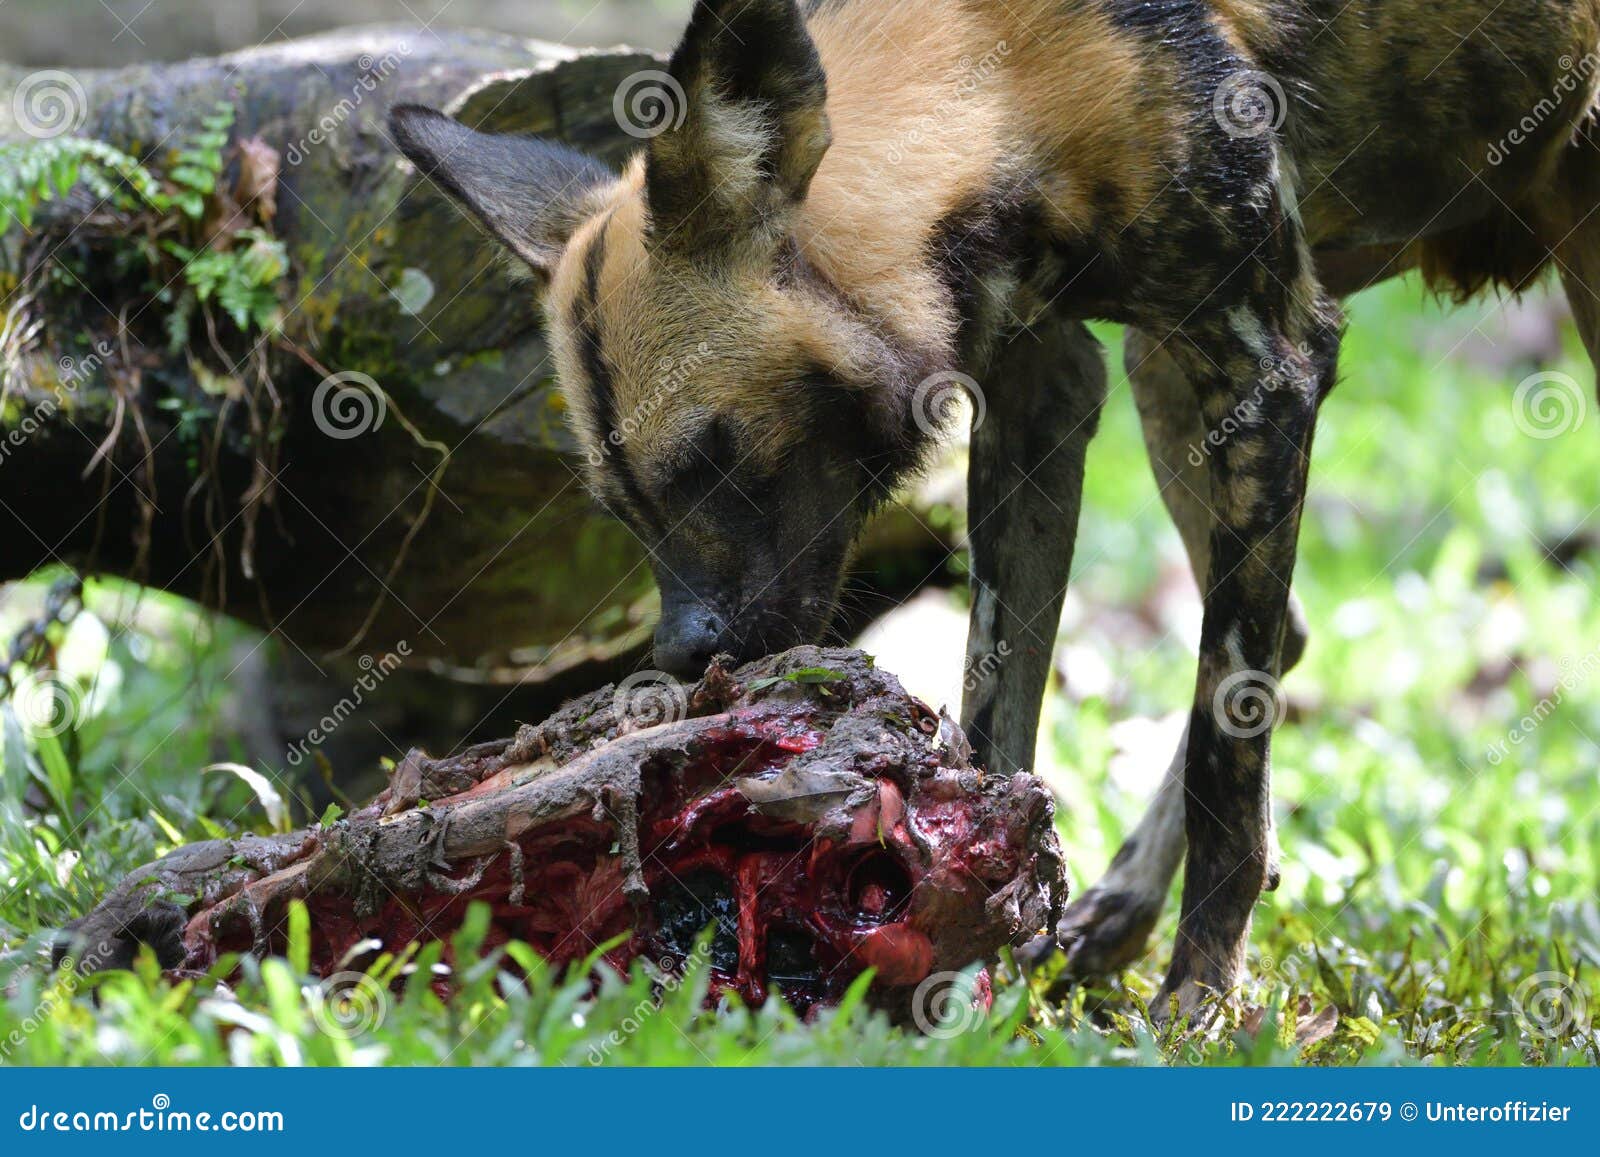 An African Painted Dogs Gnawing at a Dead Carcass of an Animal it Preyed on  Stock Image - Image of brownish, forager: 222222679